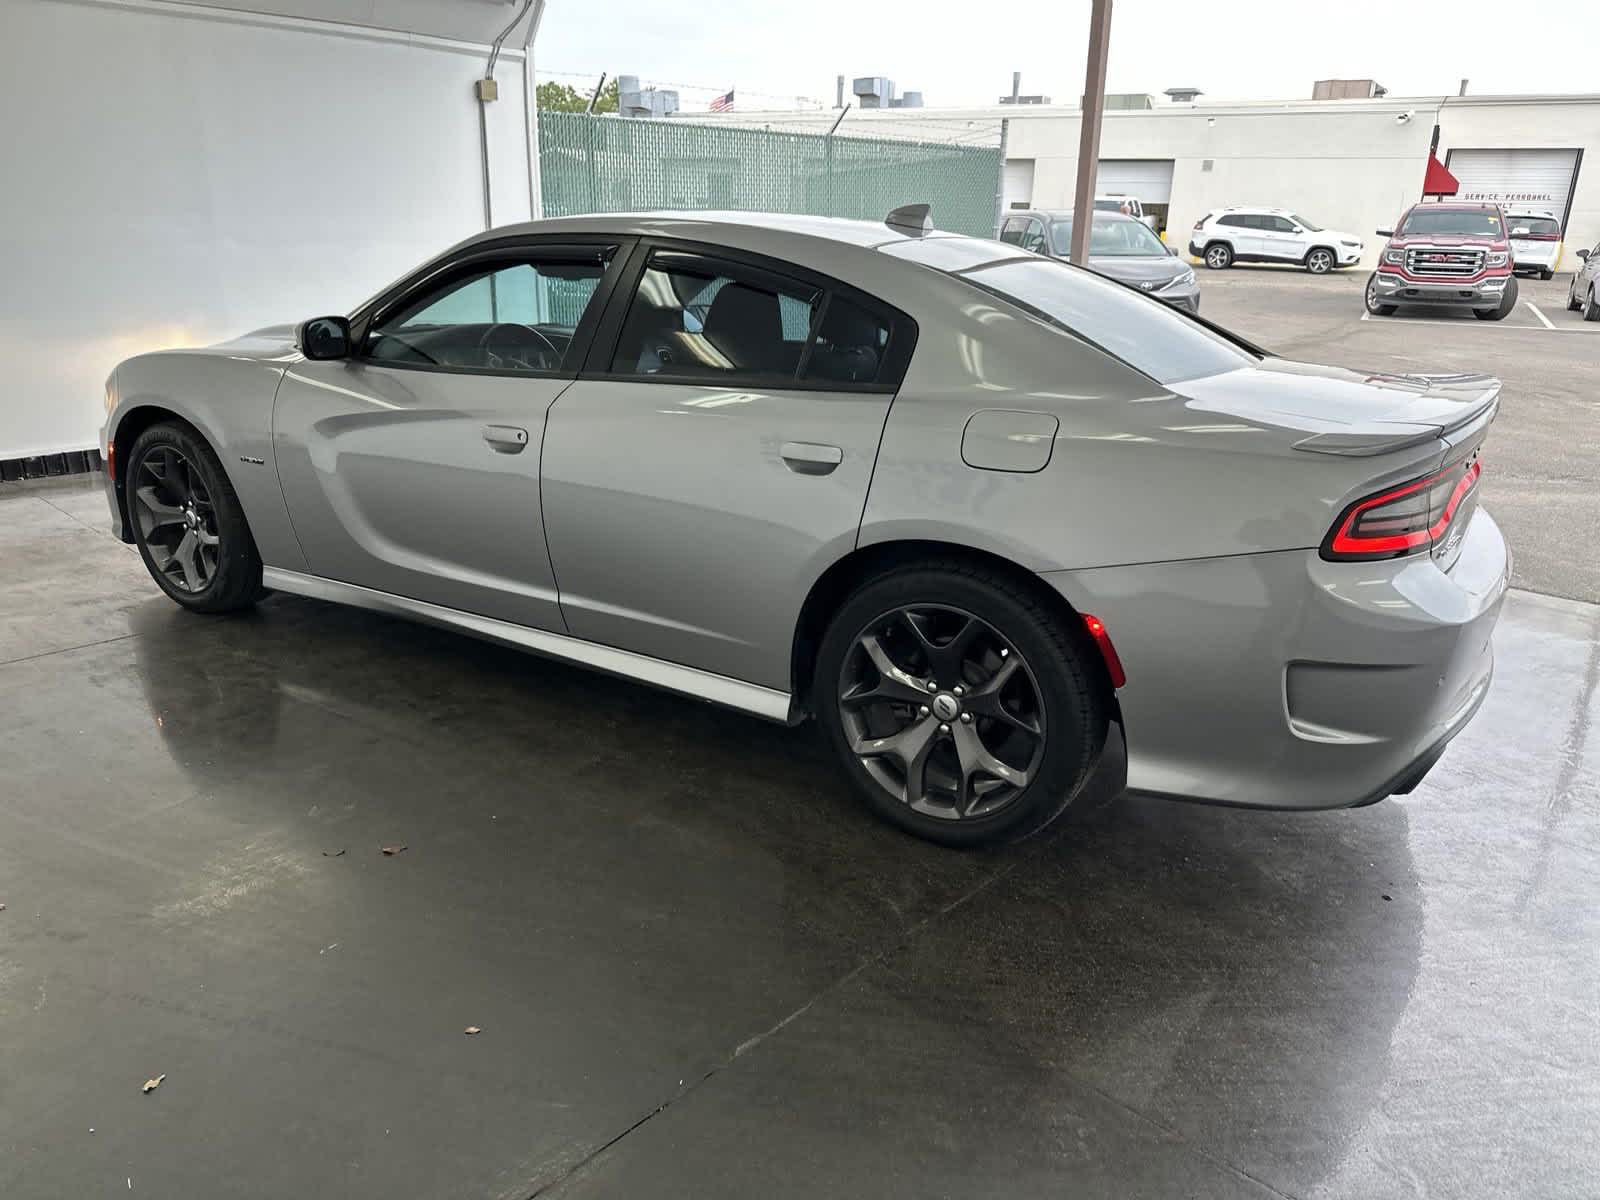 2018 Dodge Charger R/T 6